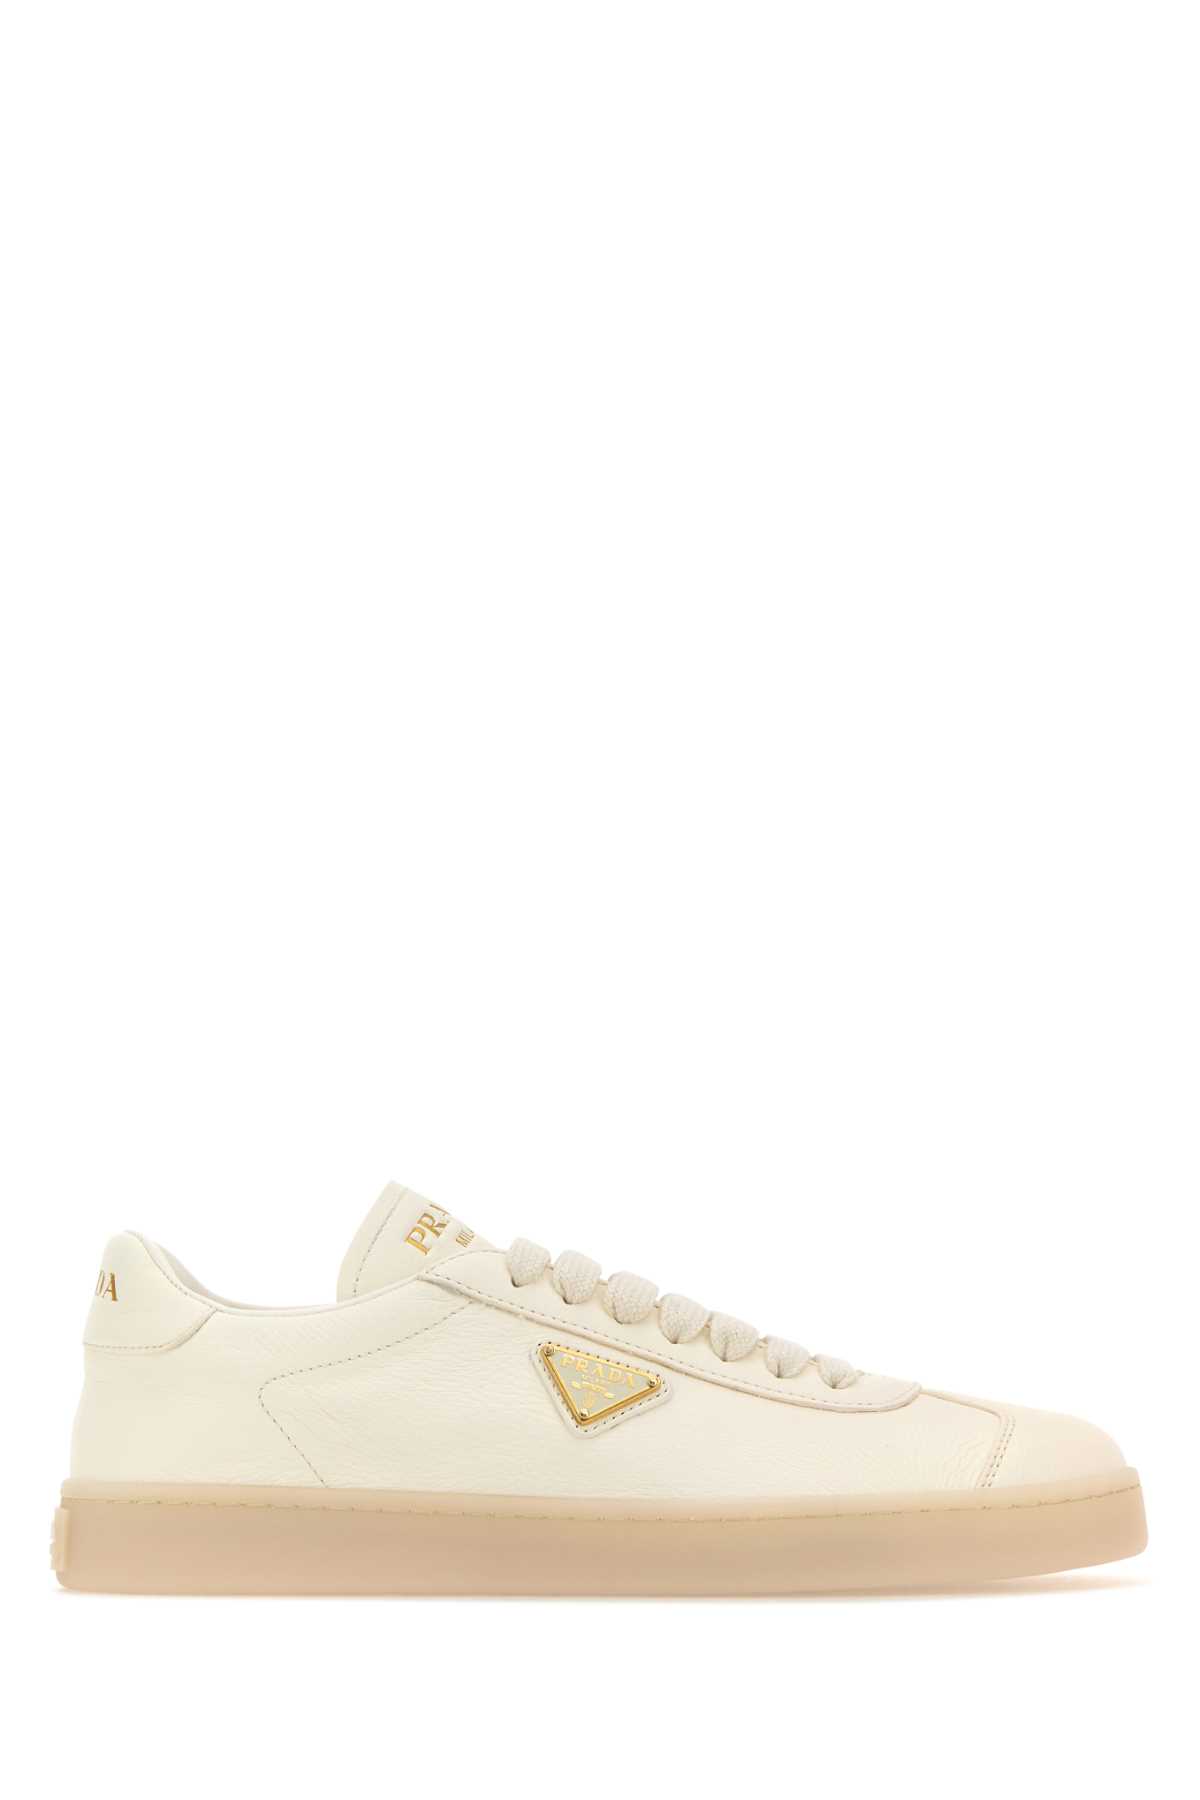 Prada Ivory Leather Downtown Sneakers